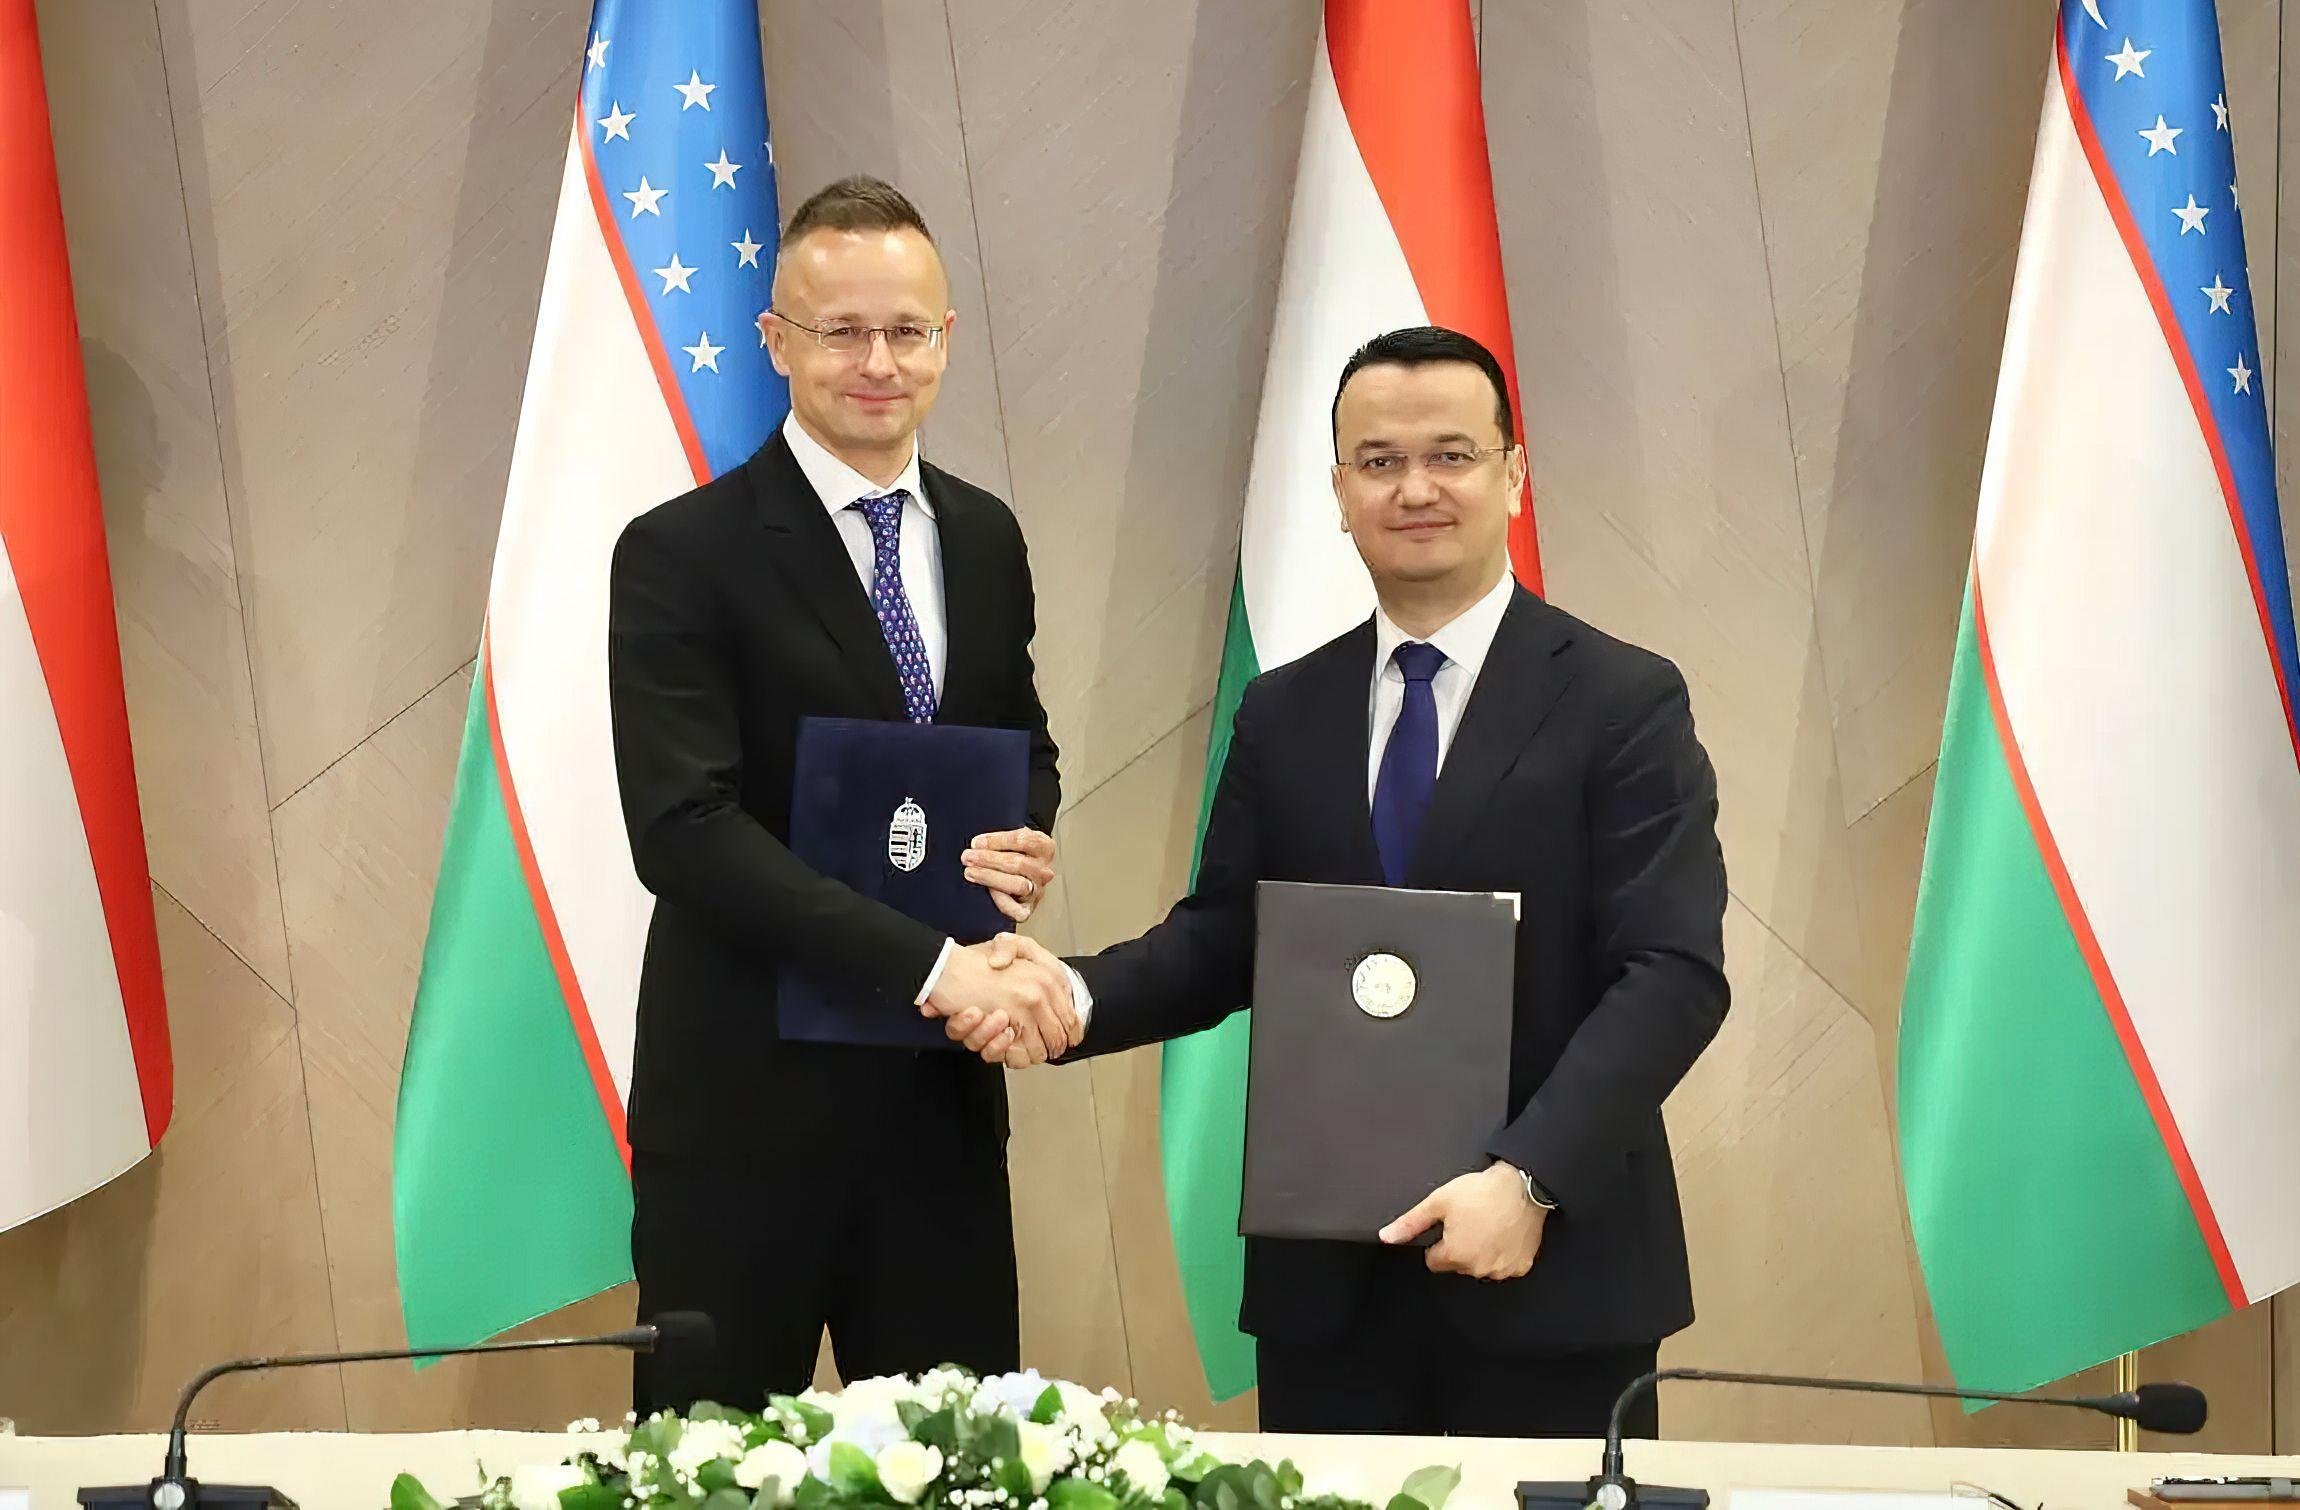 The 9th meeting of the Uzbek-Hungarian Intergovernmental Commission on Economic Cooperation was held in Tashkent